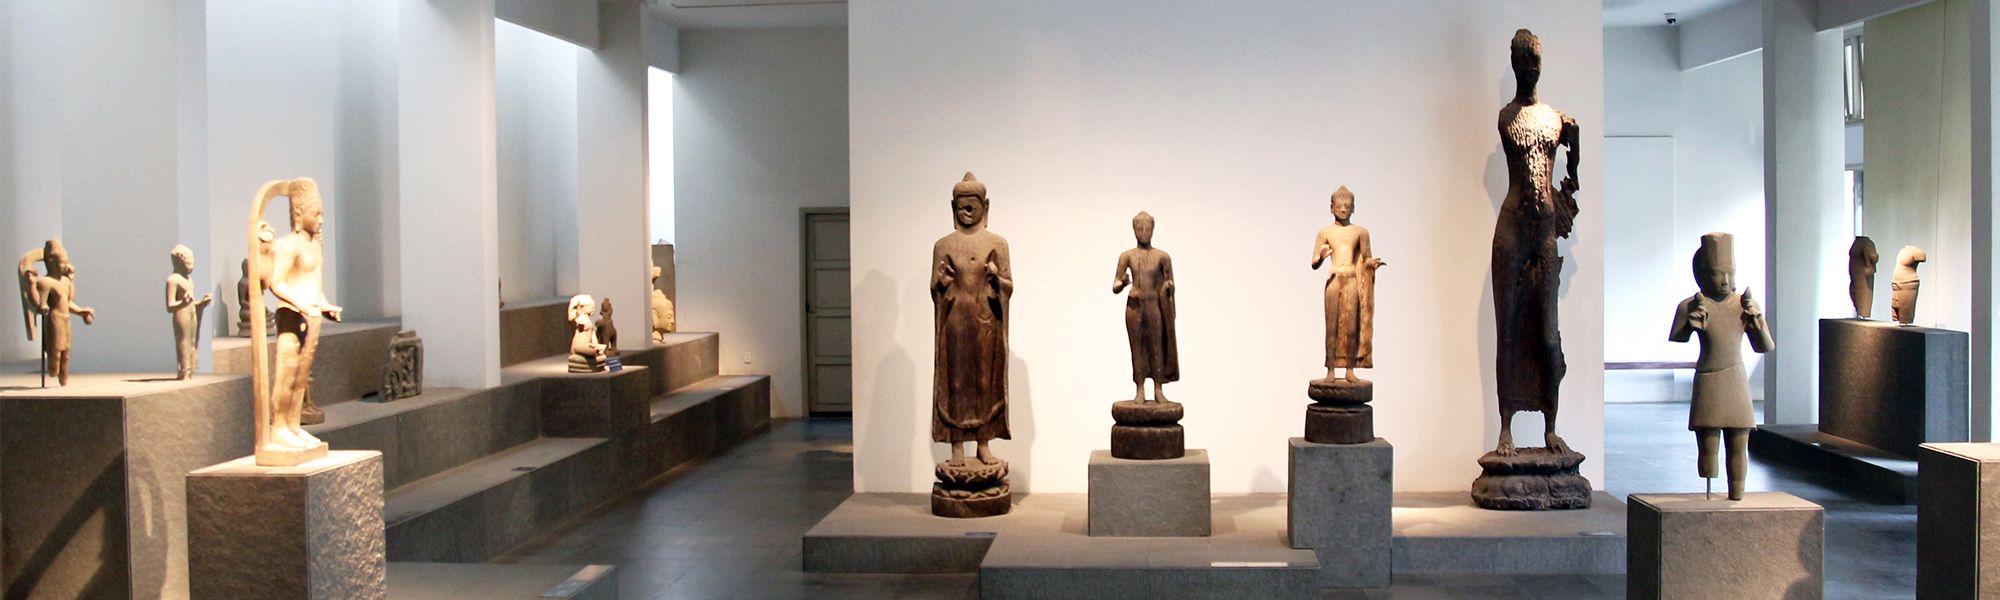 Óc Eo Statues in The History Museum of Hồ Chí Minh City